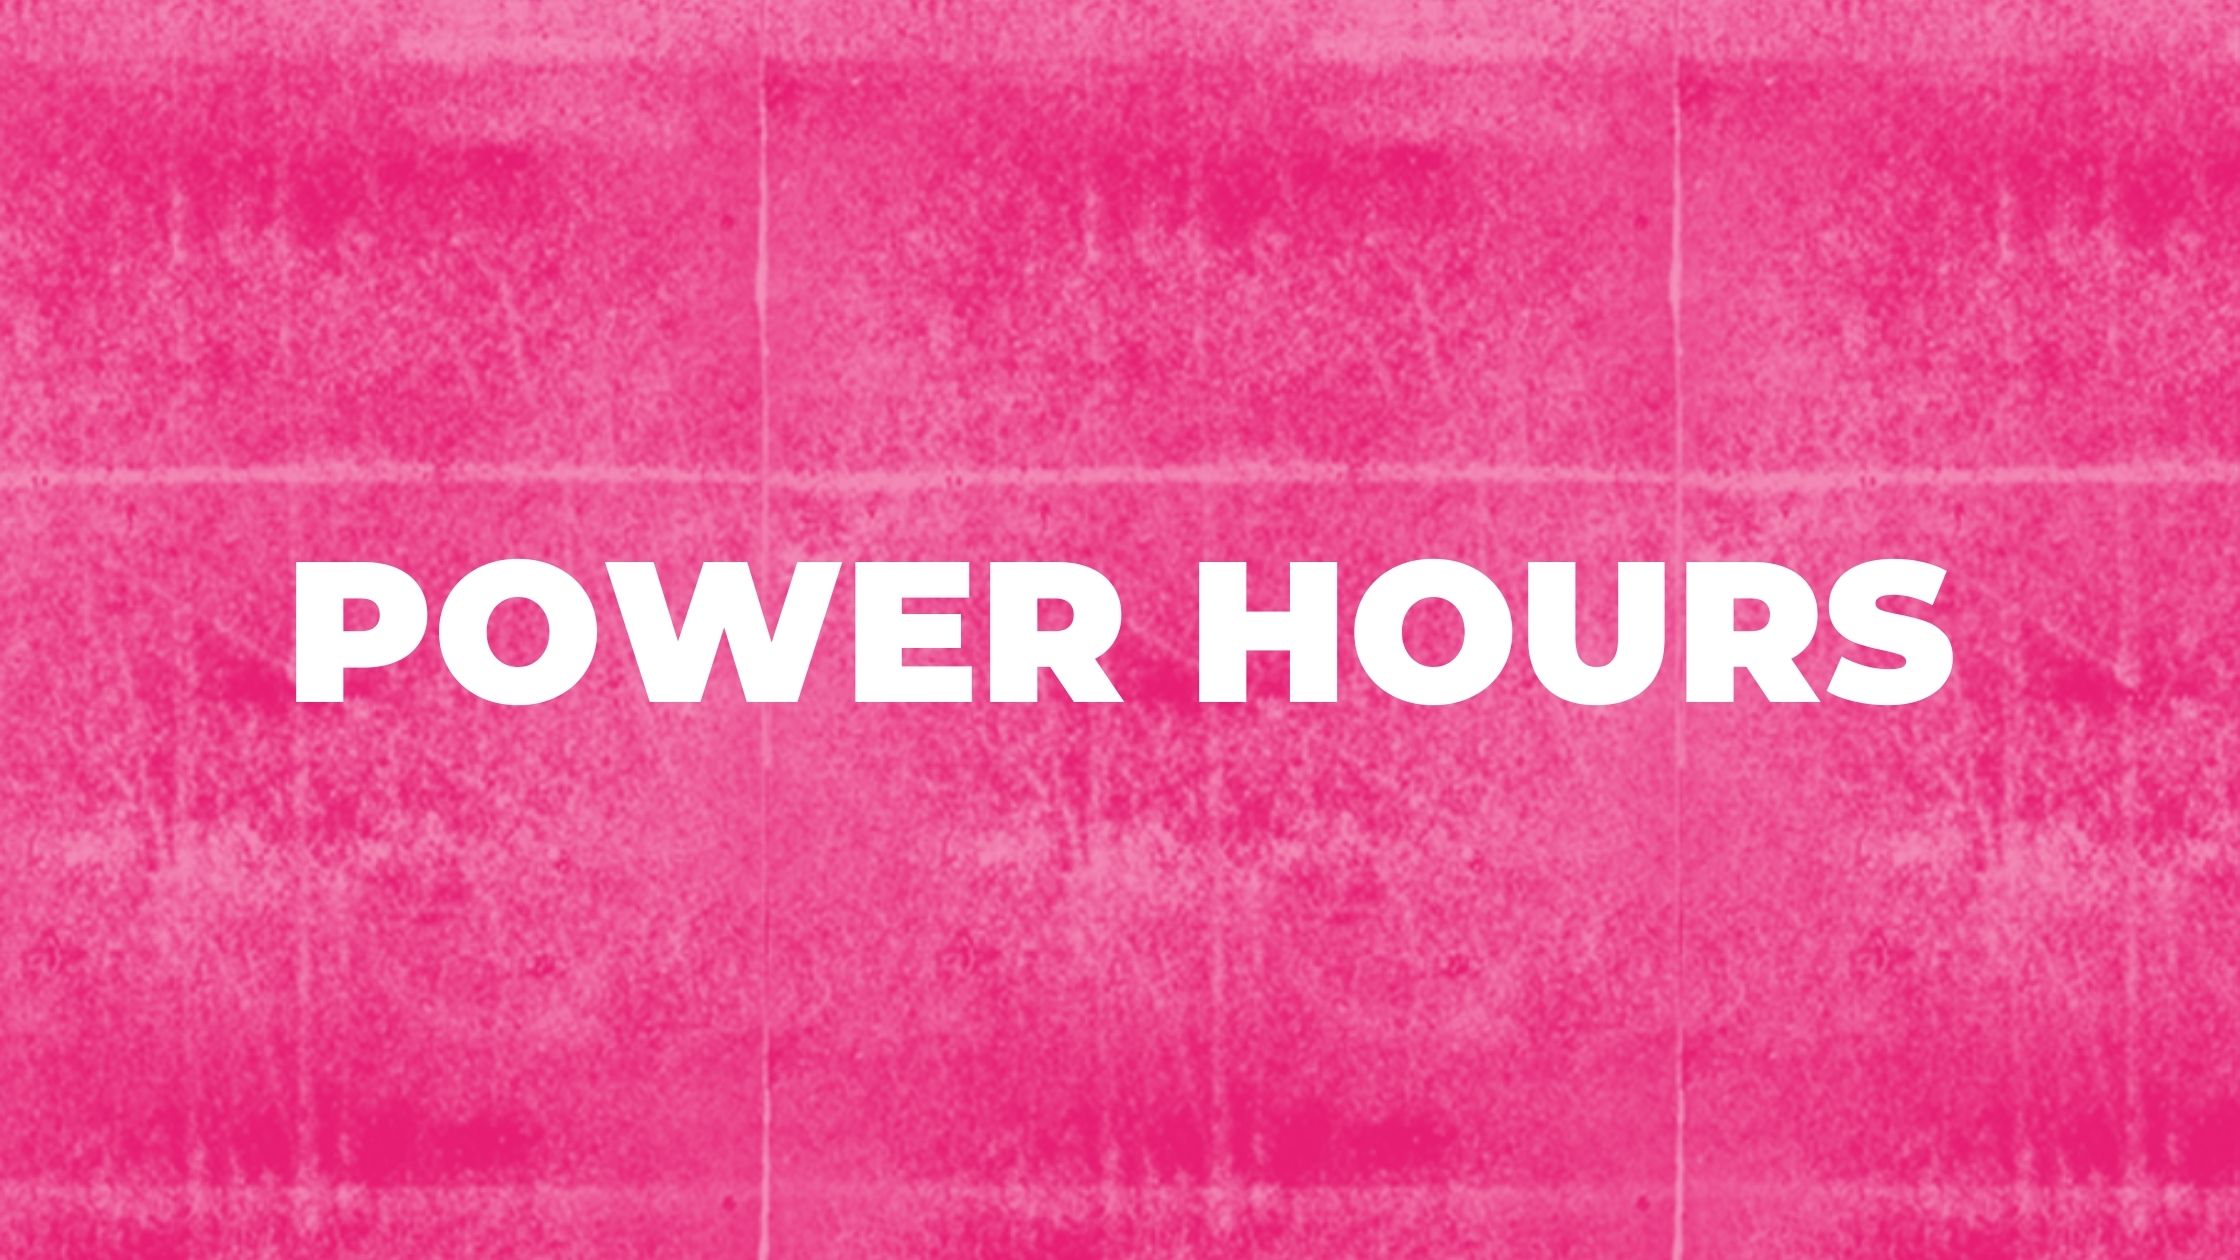 Discover if a business power hour can help your buisness